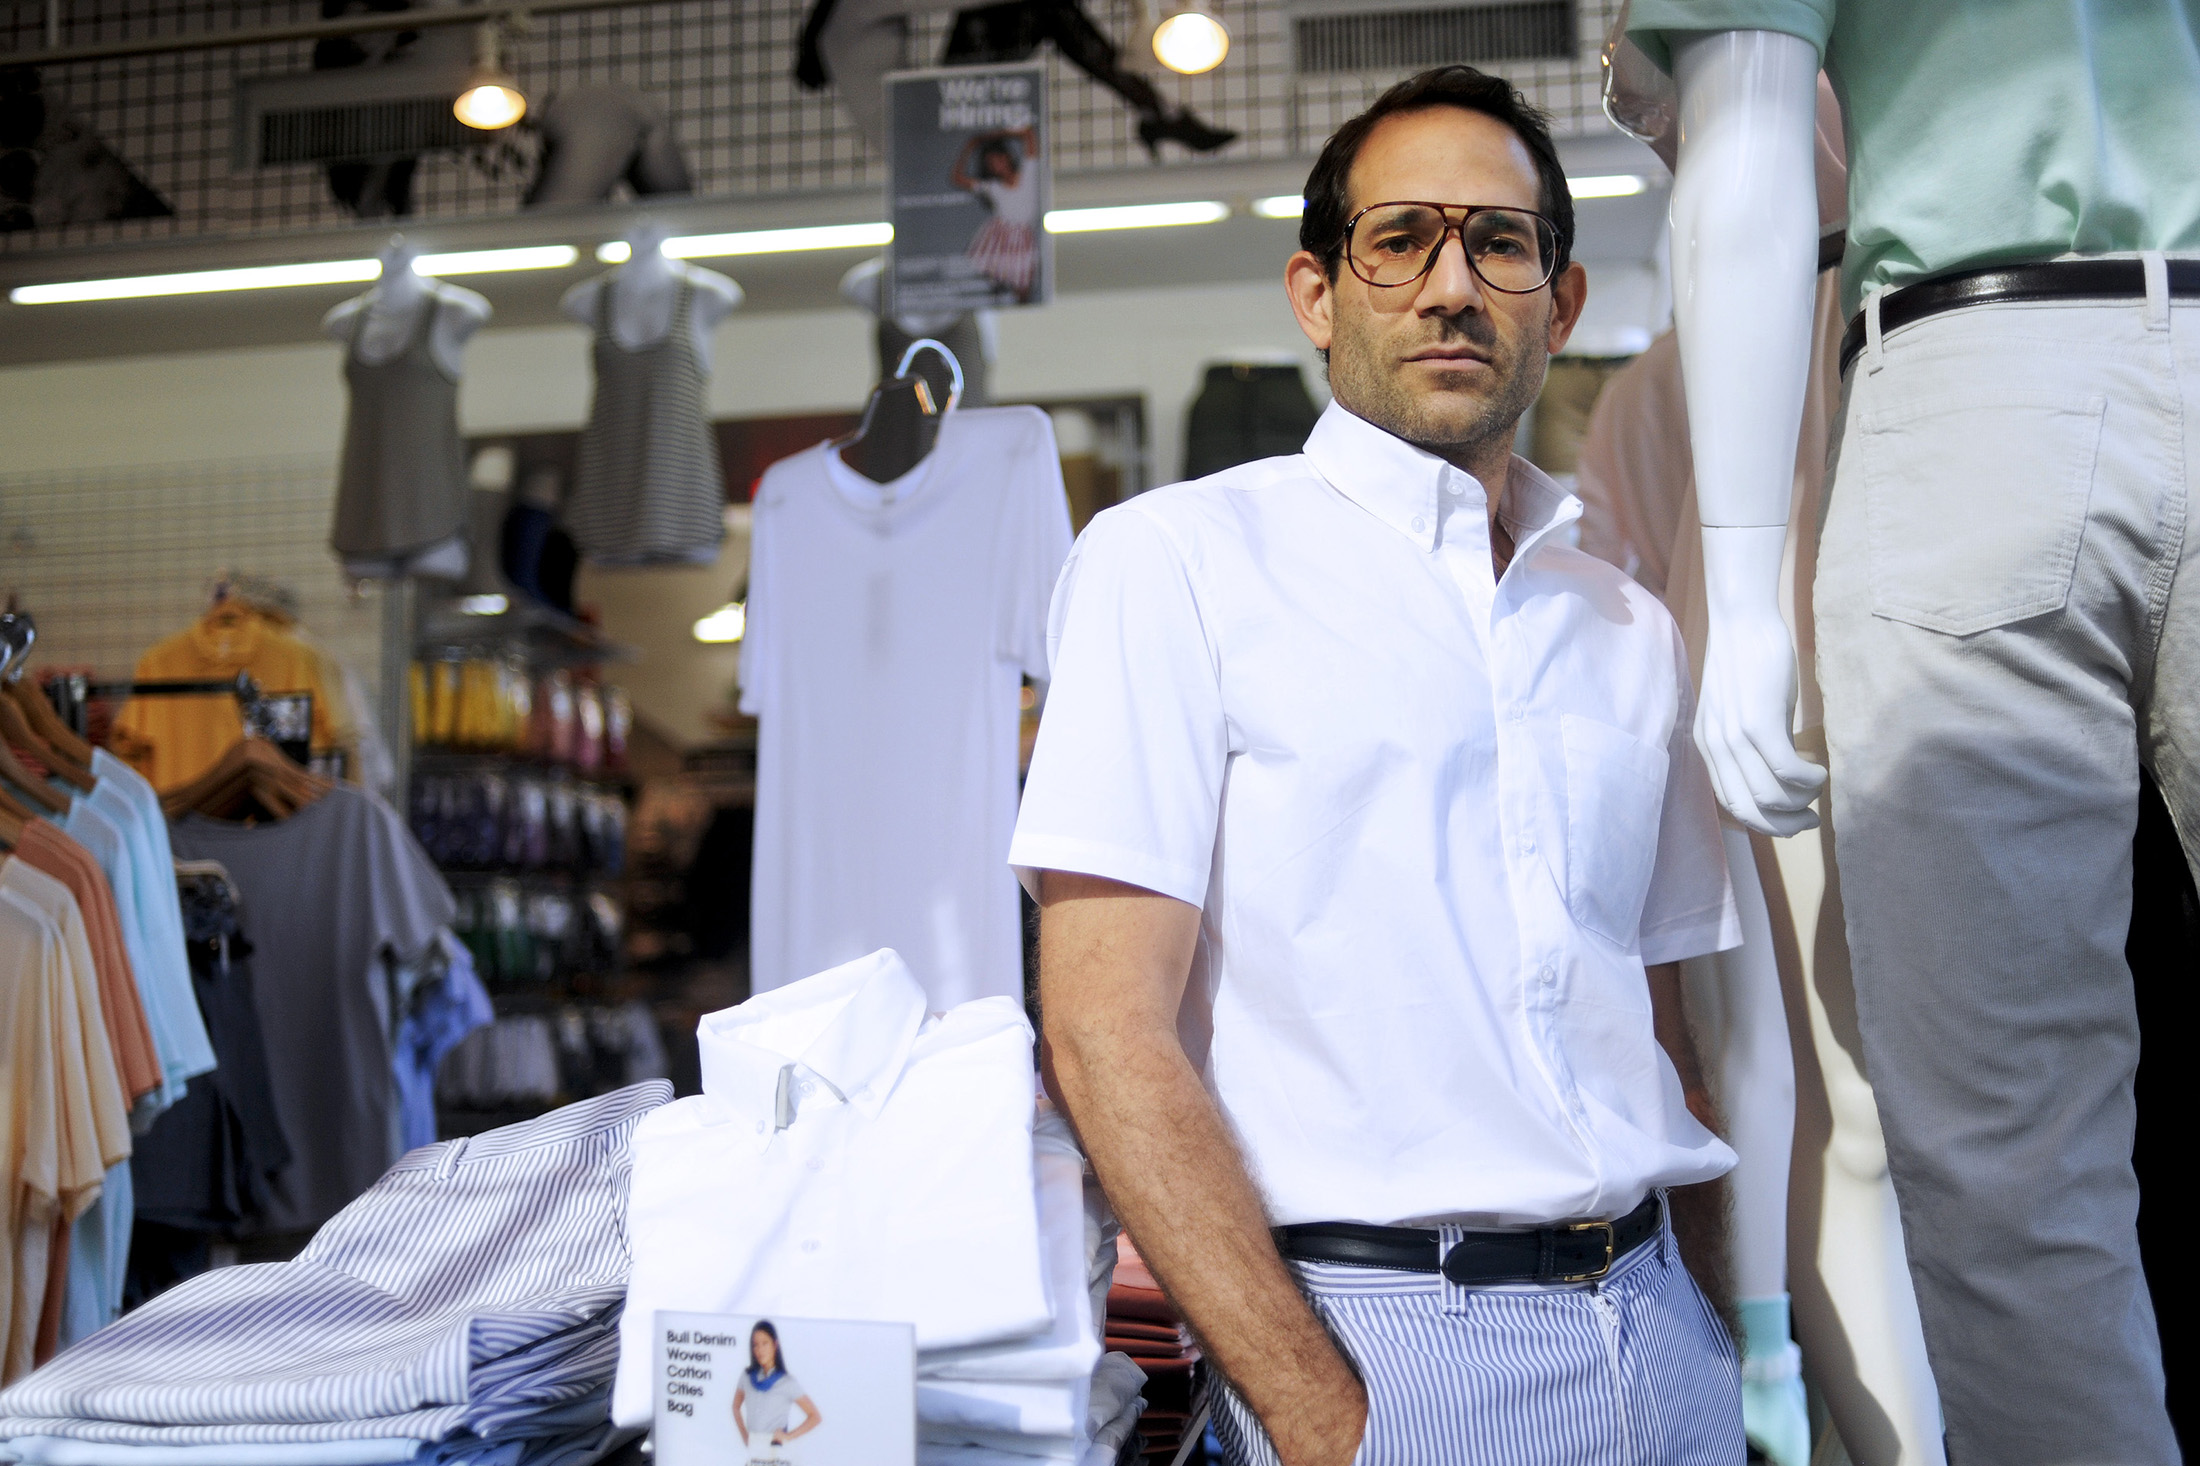 The rise and fall of American Apparel, American Apparel